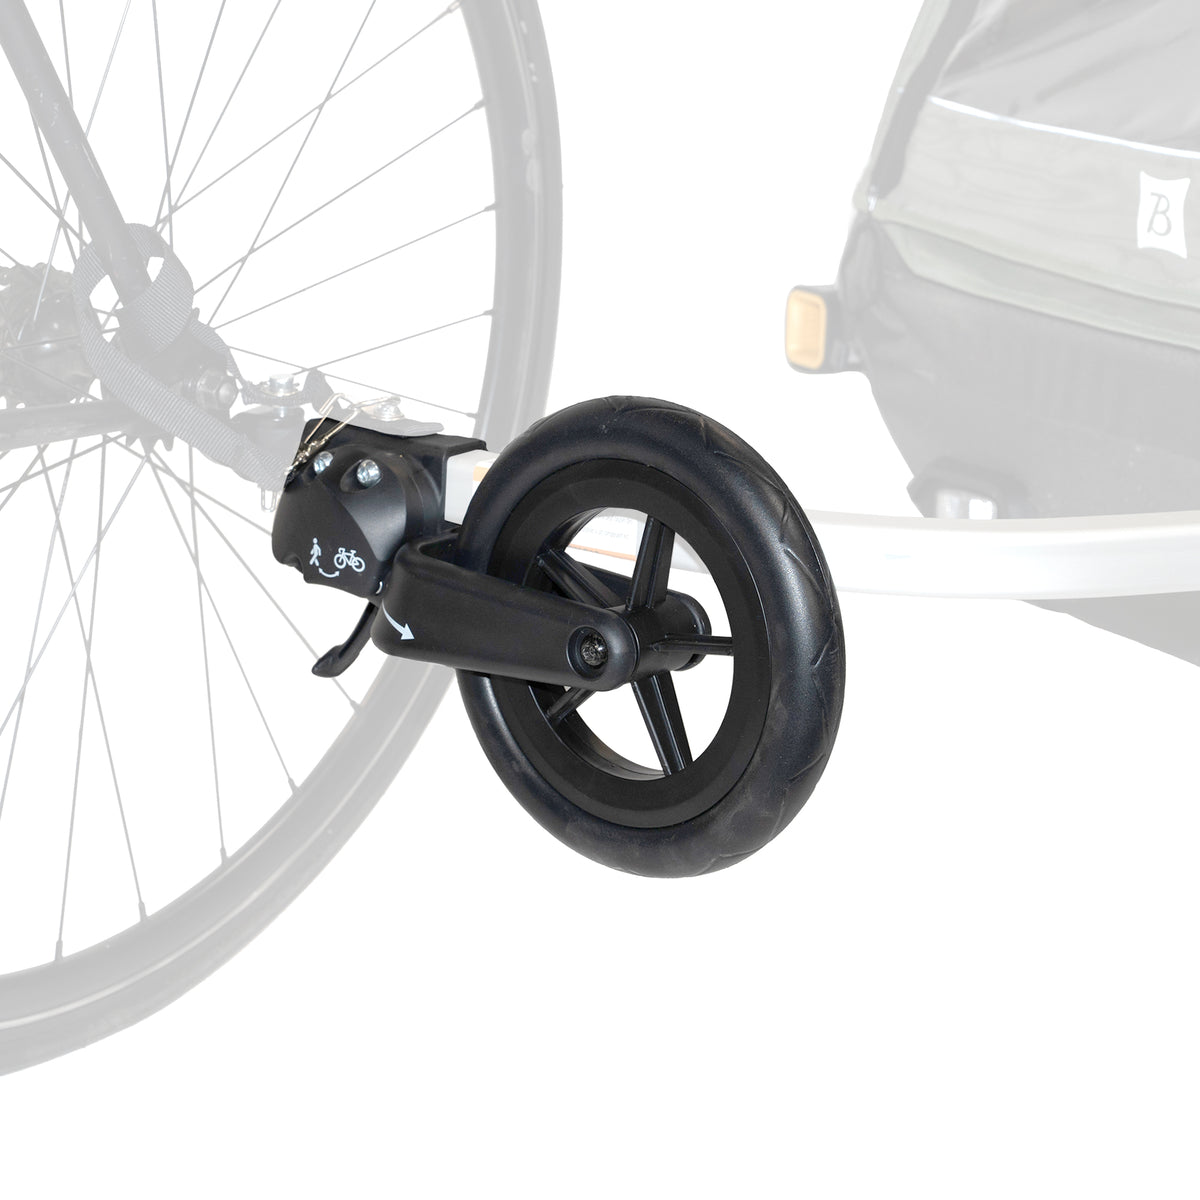 1-Wheel Stroller Kit attached to bike